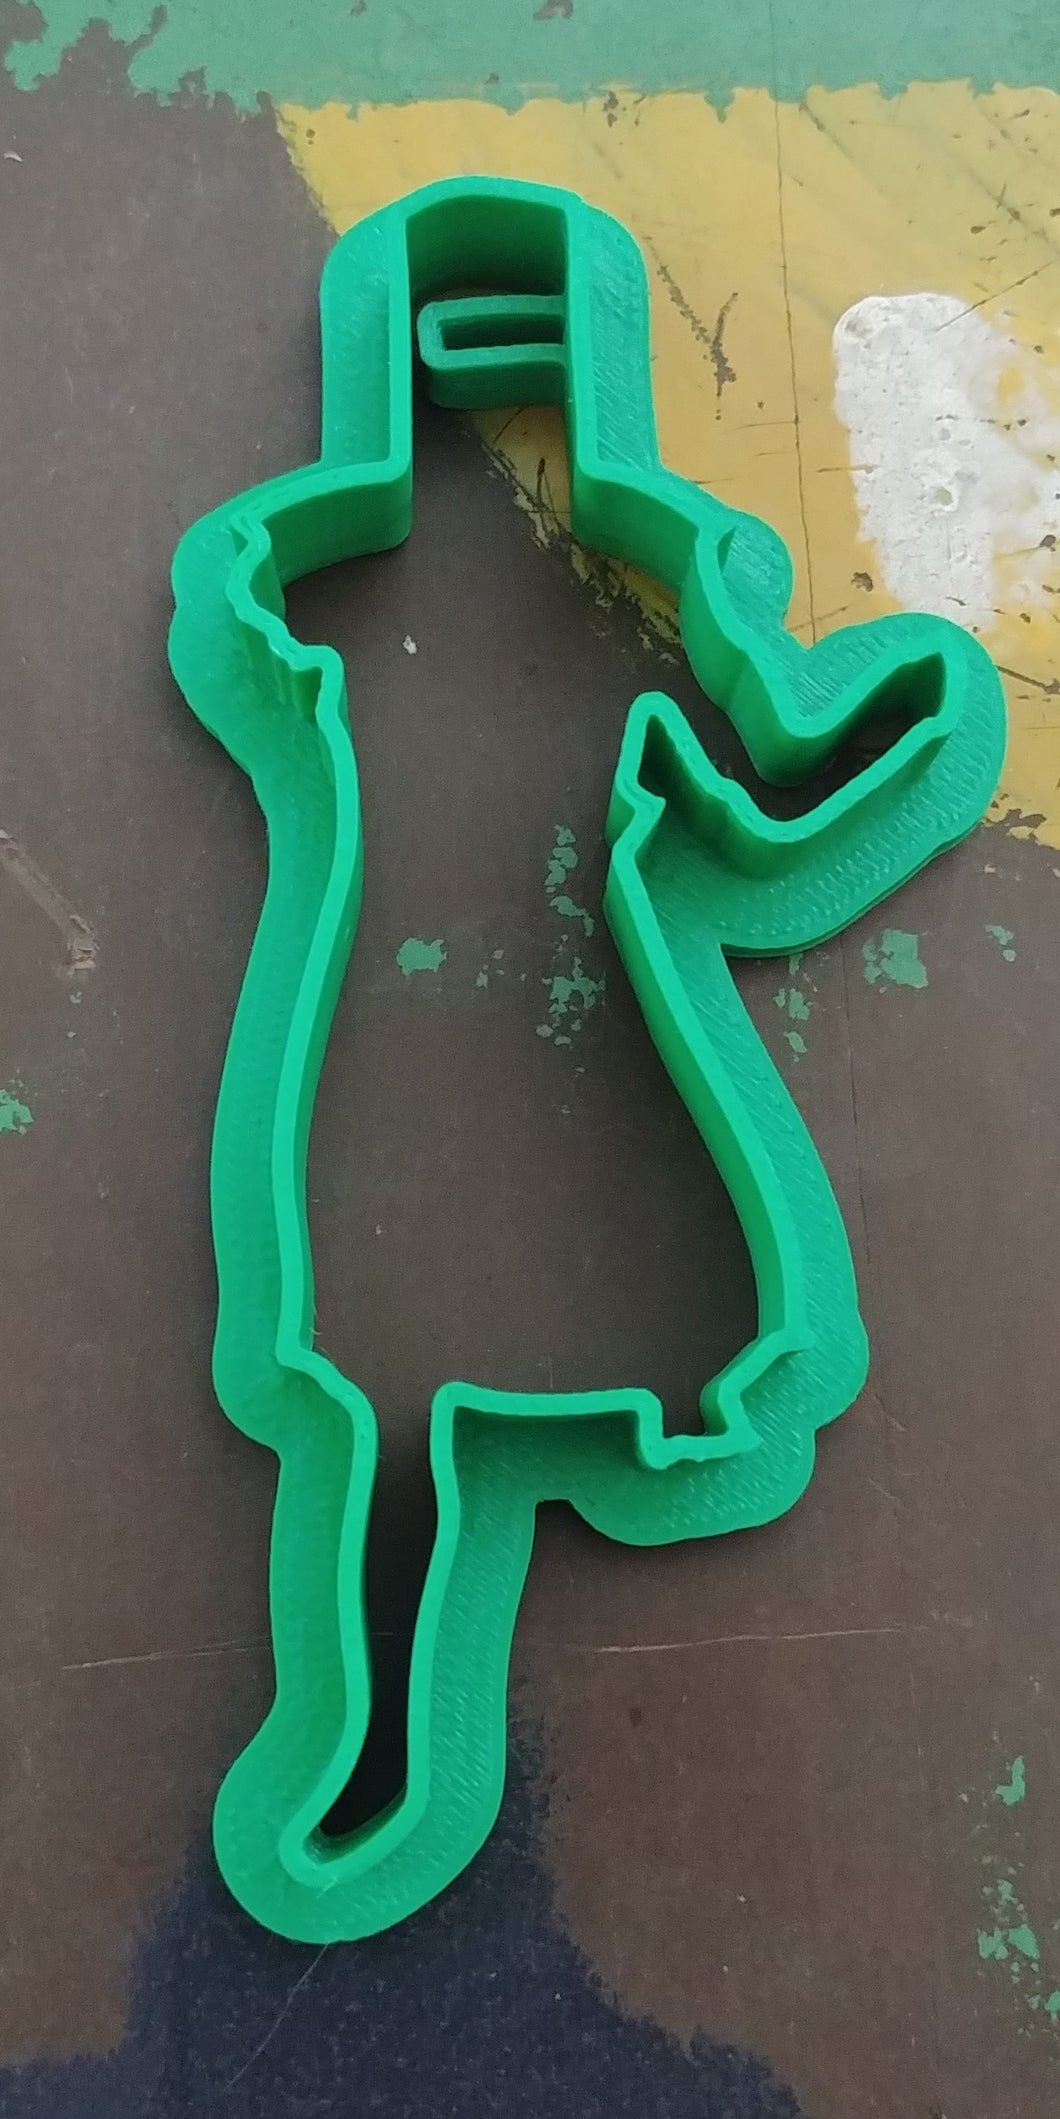 3D Printed Cookie Cutter Inspired by Monty Pythons Black Knight